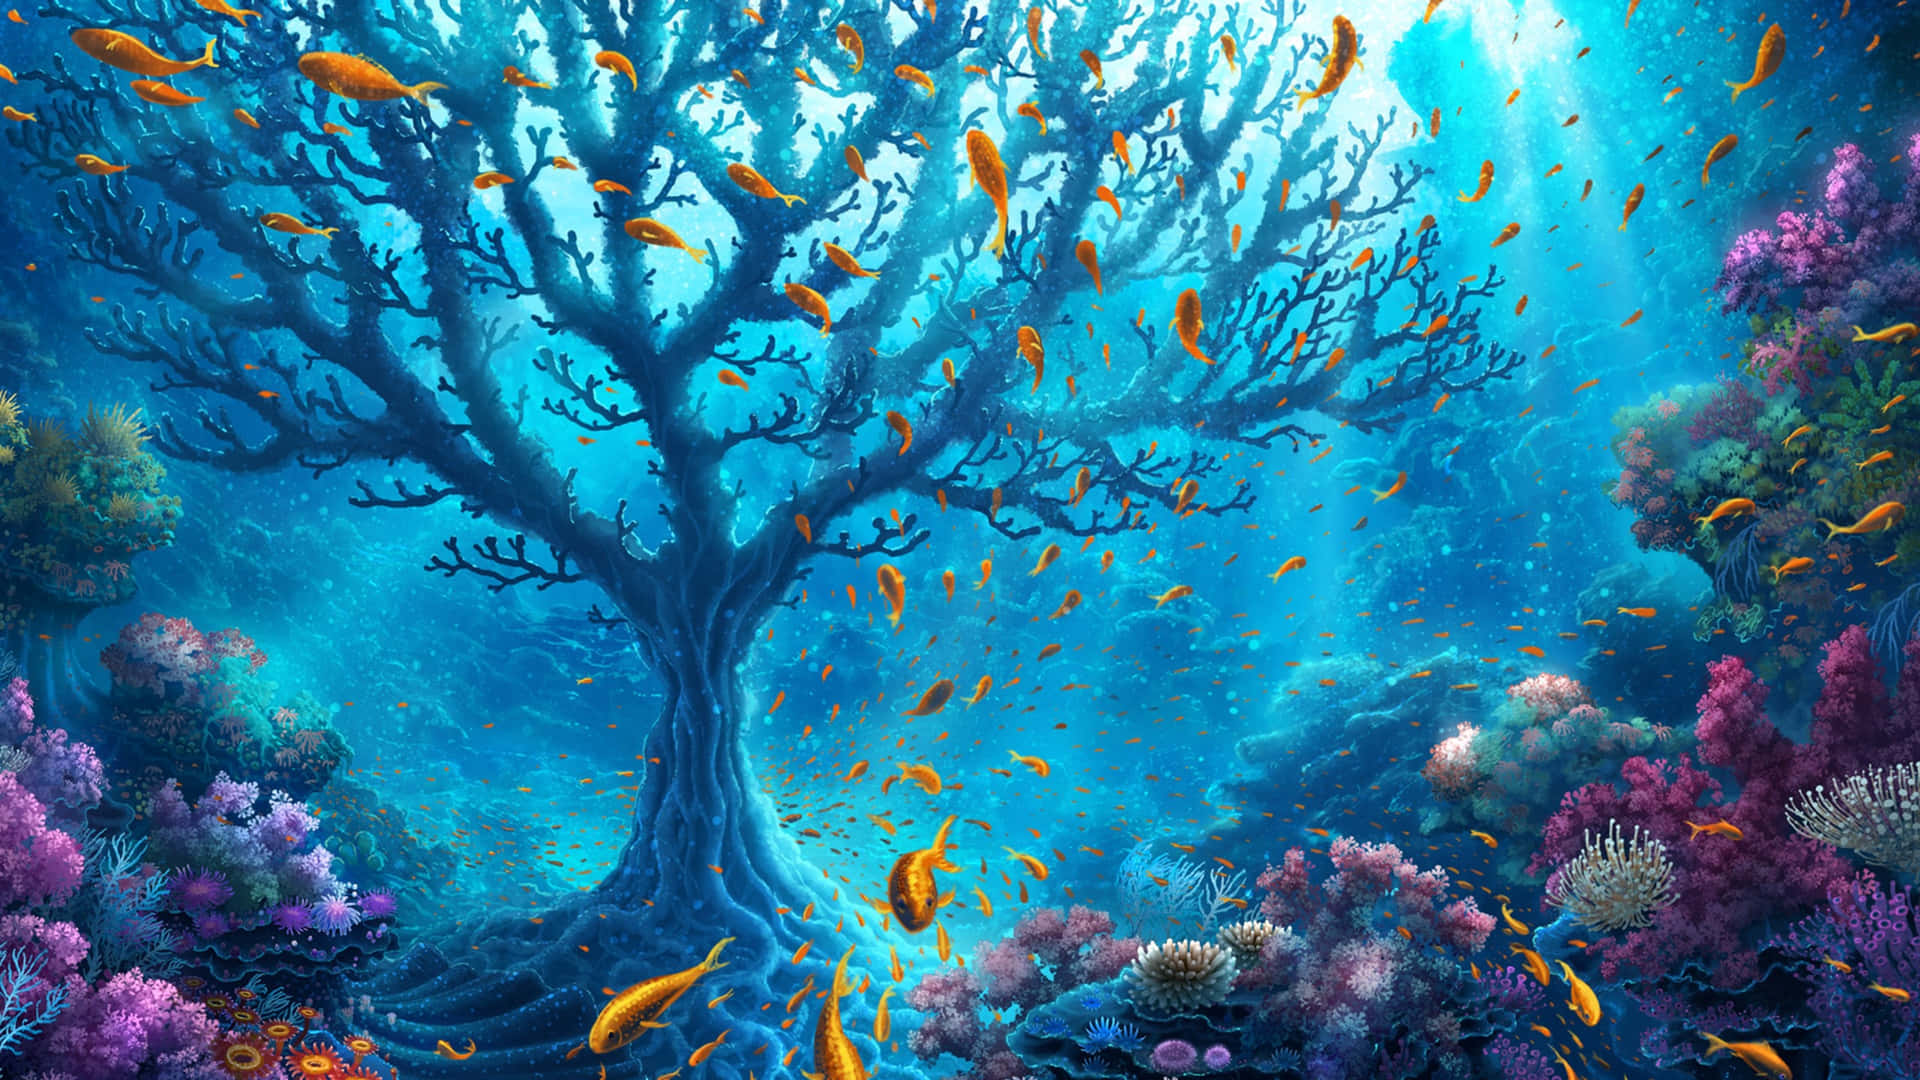 Life and beauty in the underwater ocean